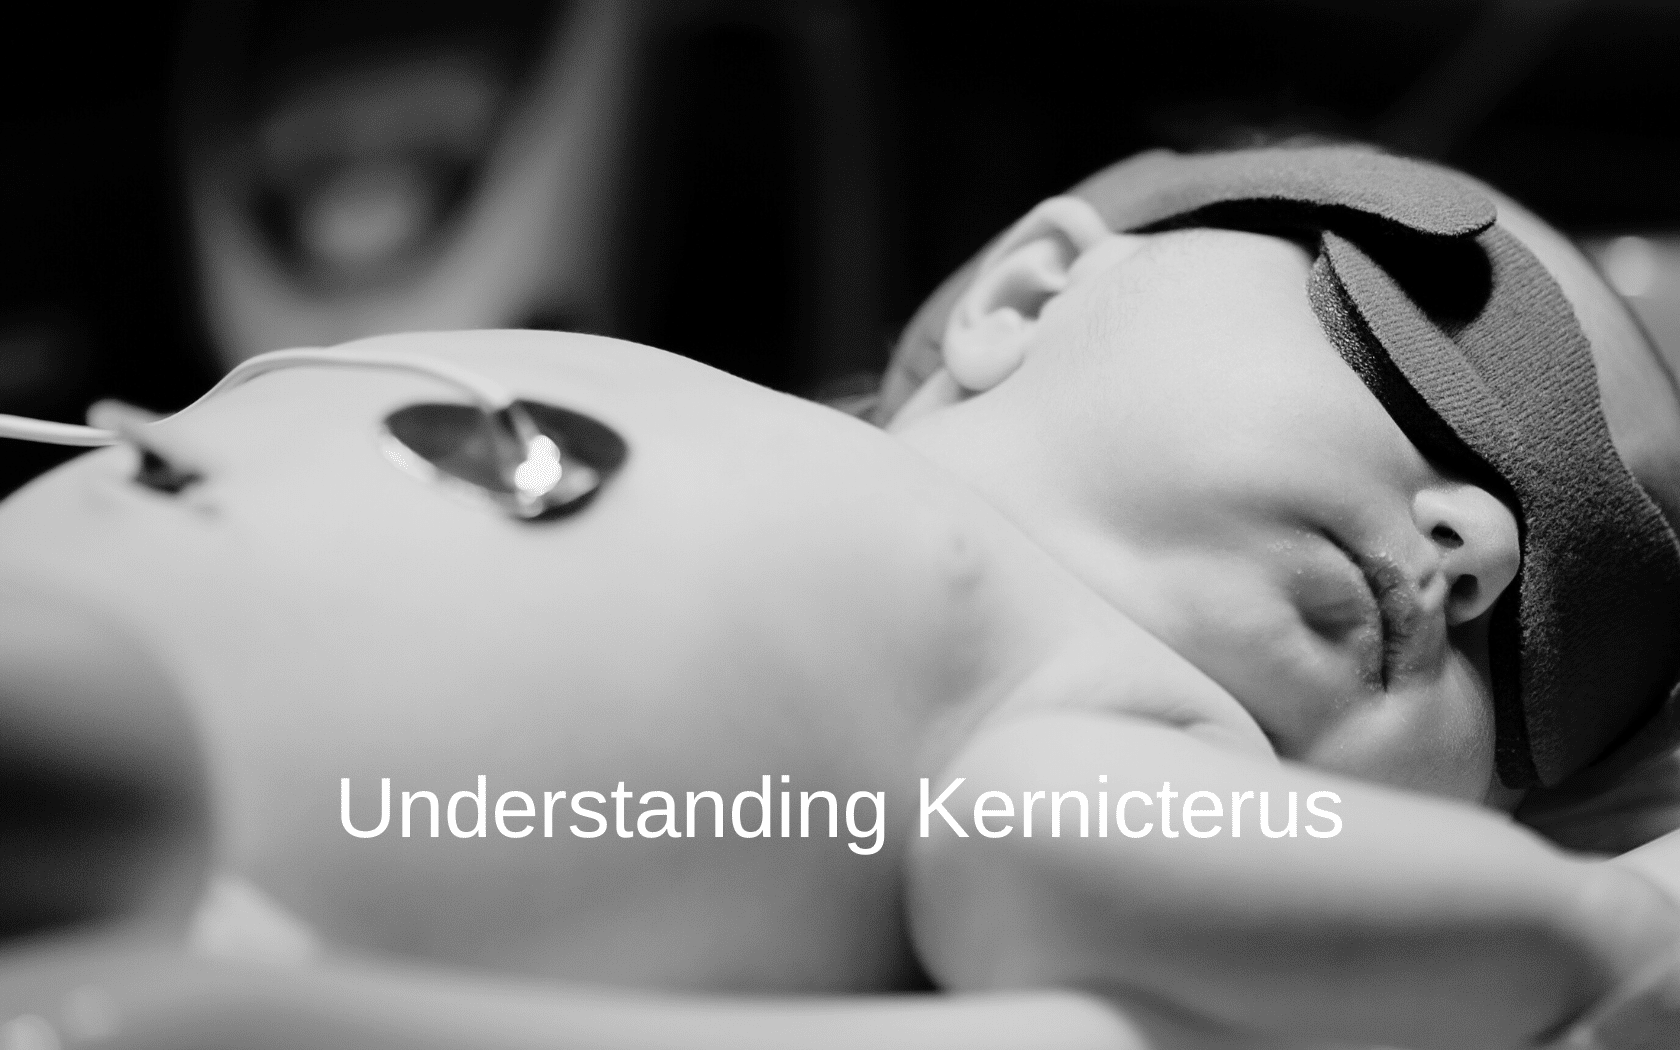 A newborn baby wears eye protection while receiving treatment for kernicterus.